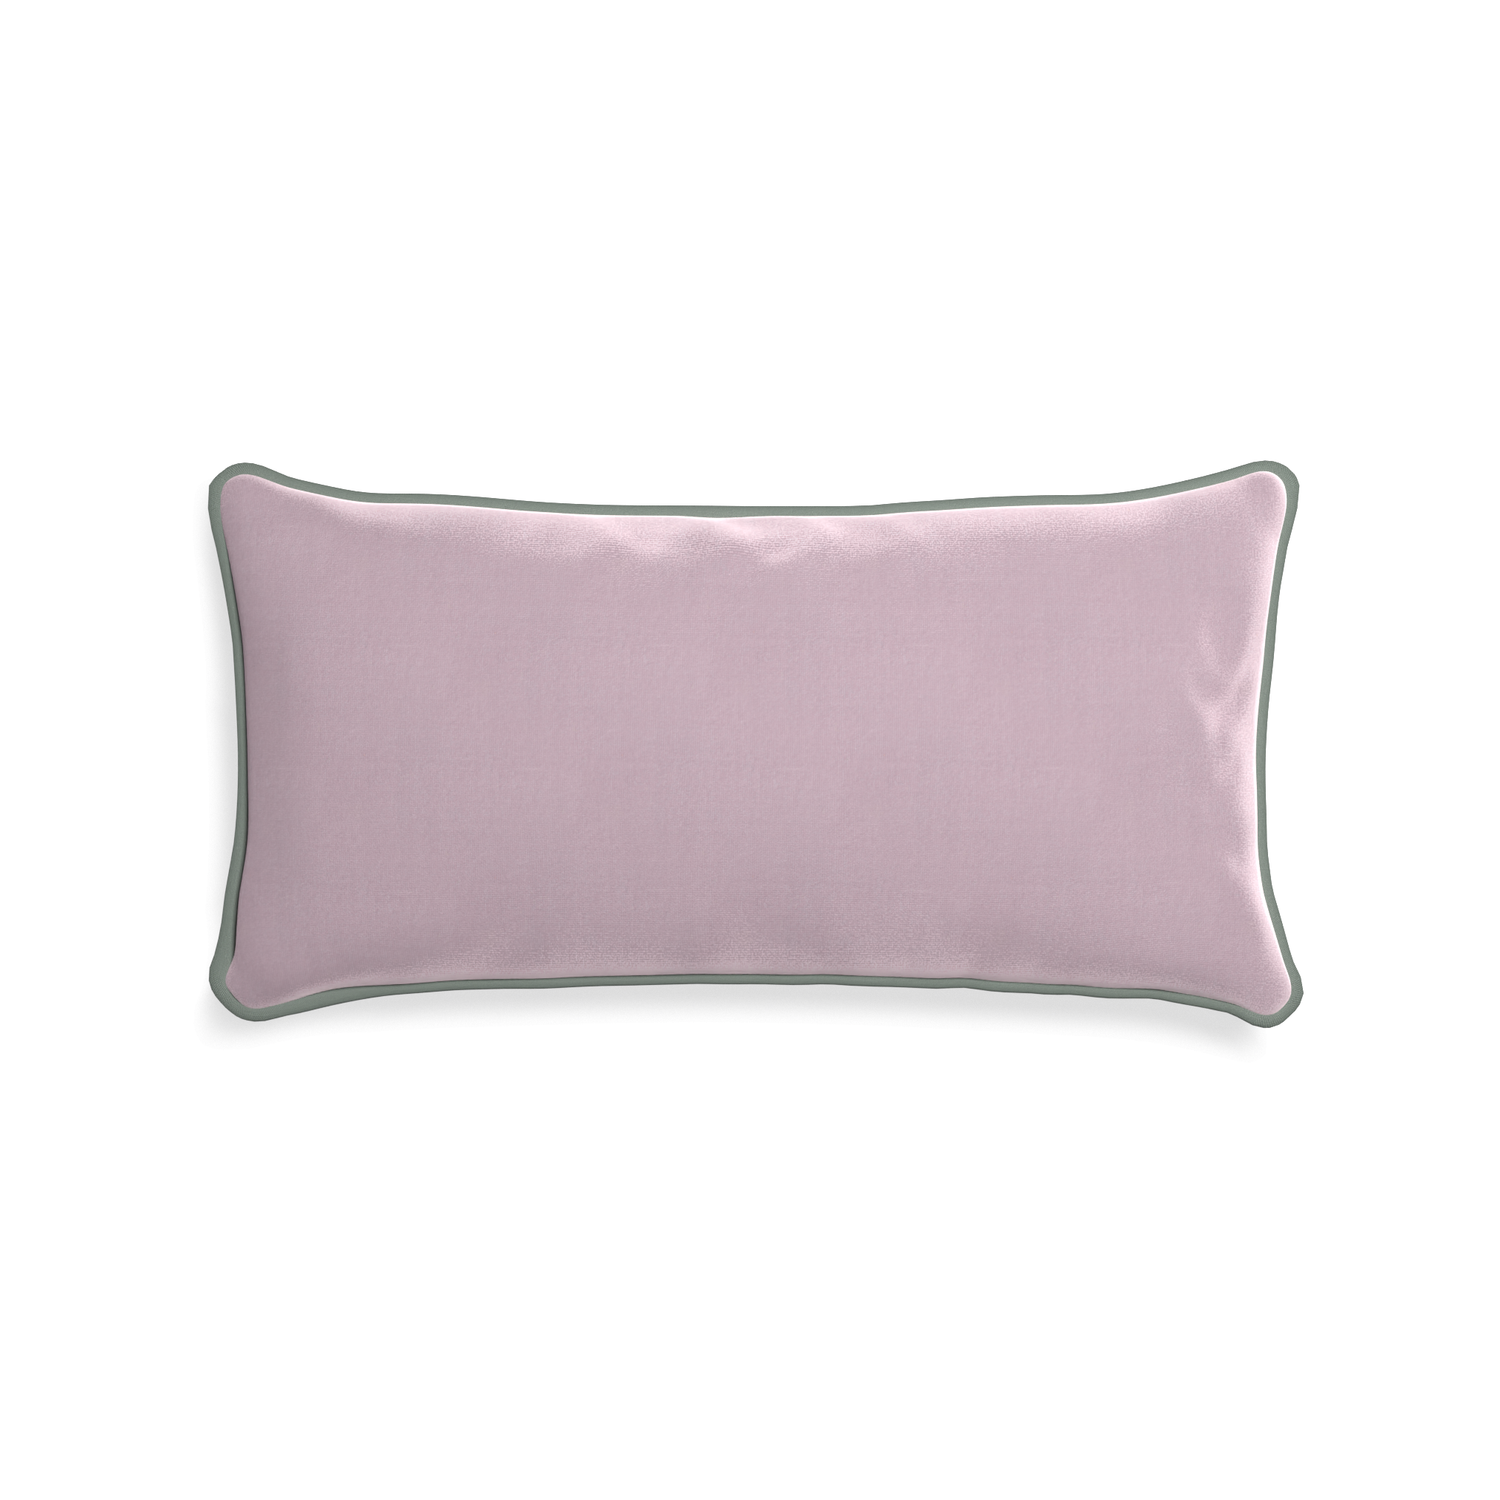 Midi-lumbar lilac velvet custom lilacpillow with sage piping on white background